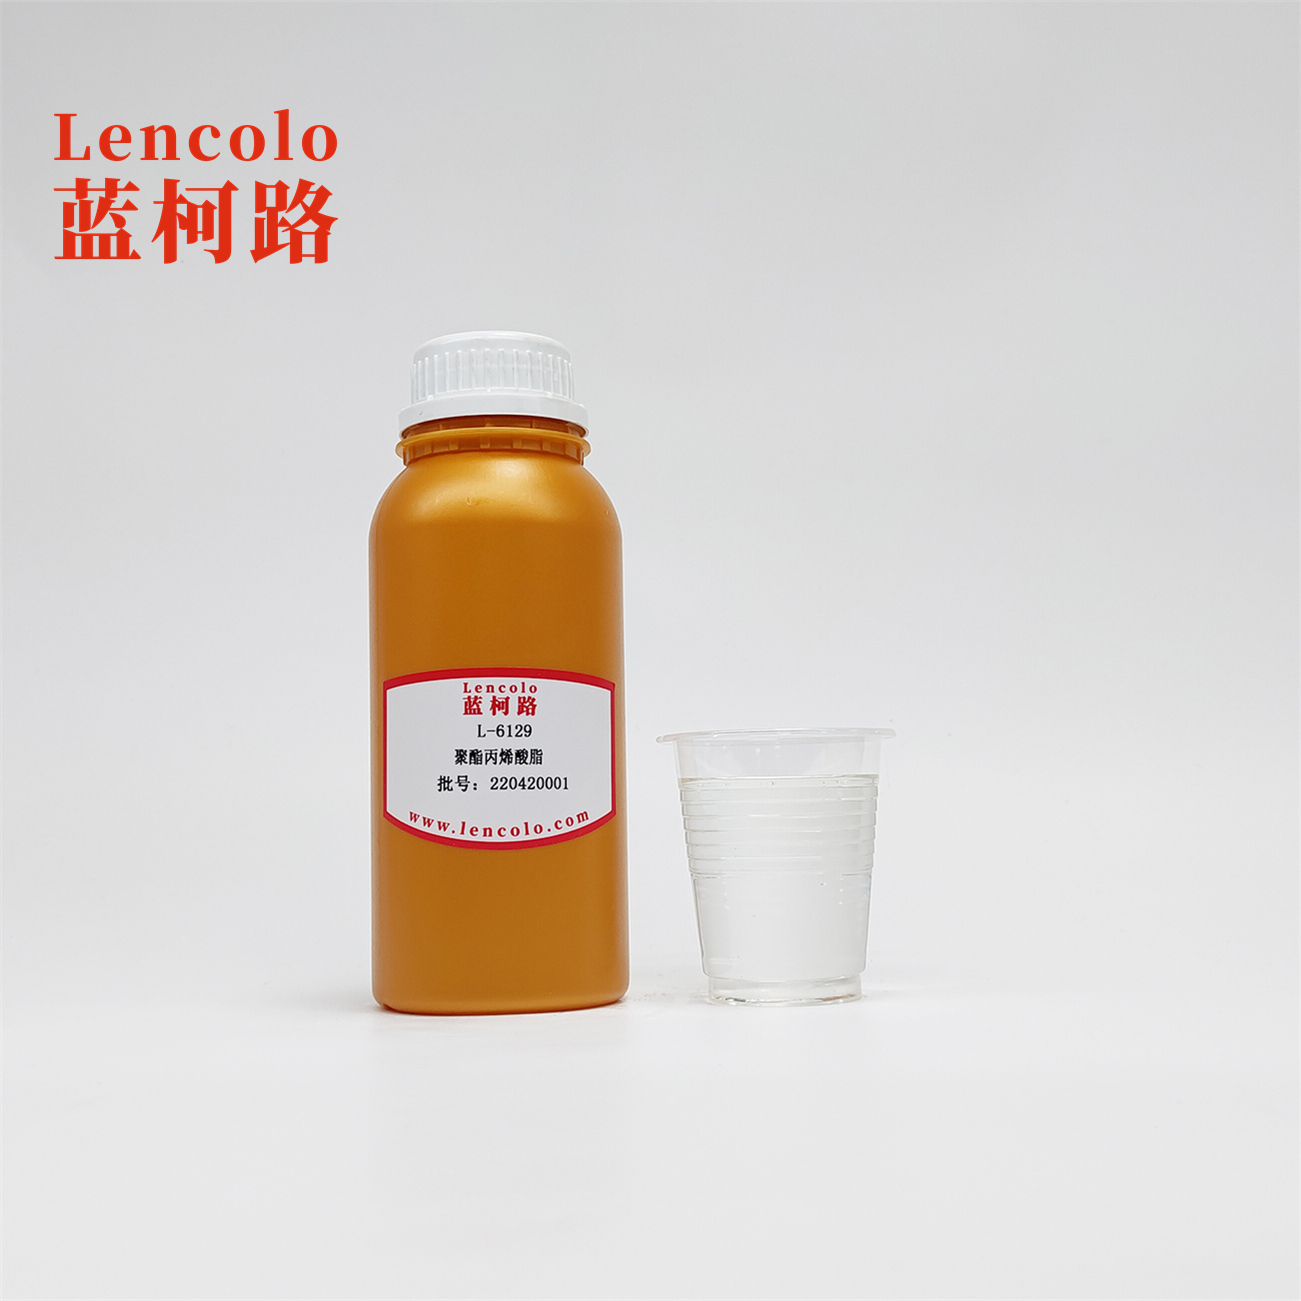 L-6129 Wettability 6-functional hyperbranched polyester